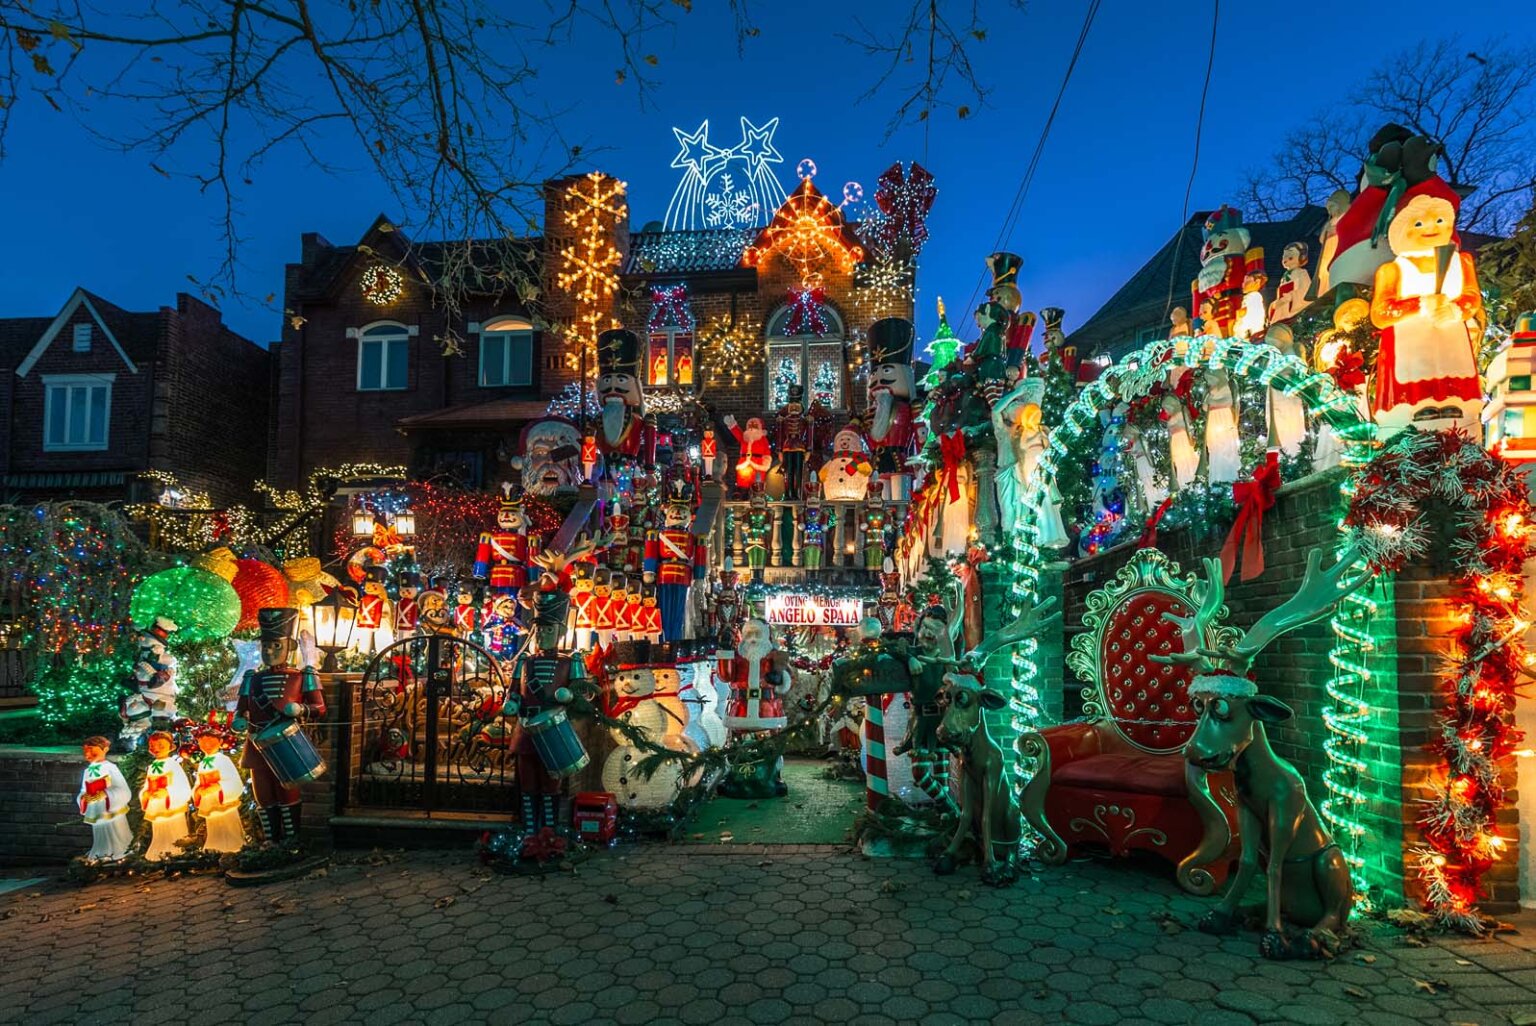 Lucy Spata House At Christmas In Dyker Heights In Brooklyn 1536x1026 